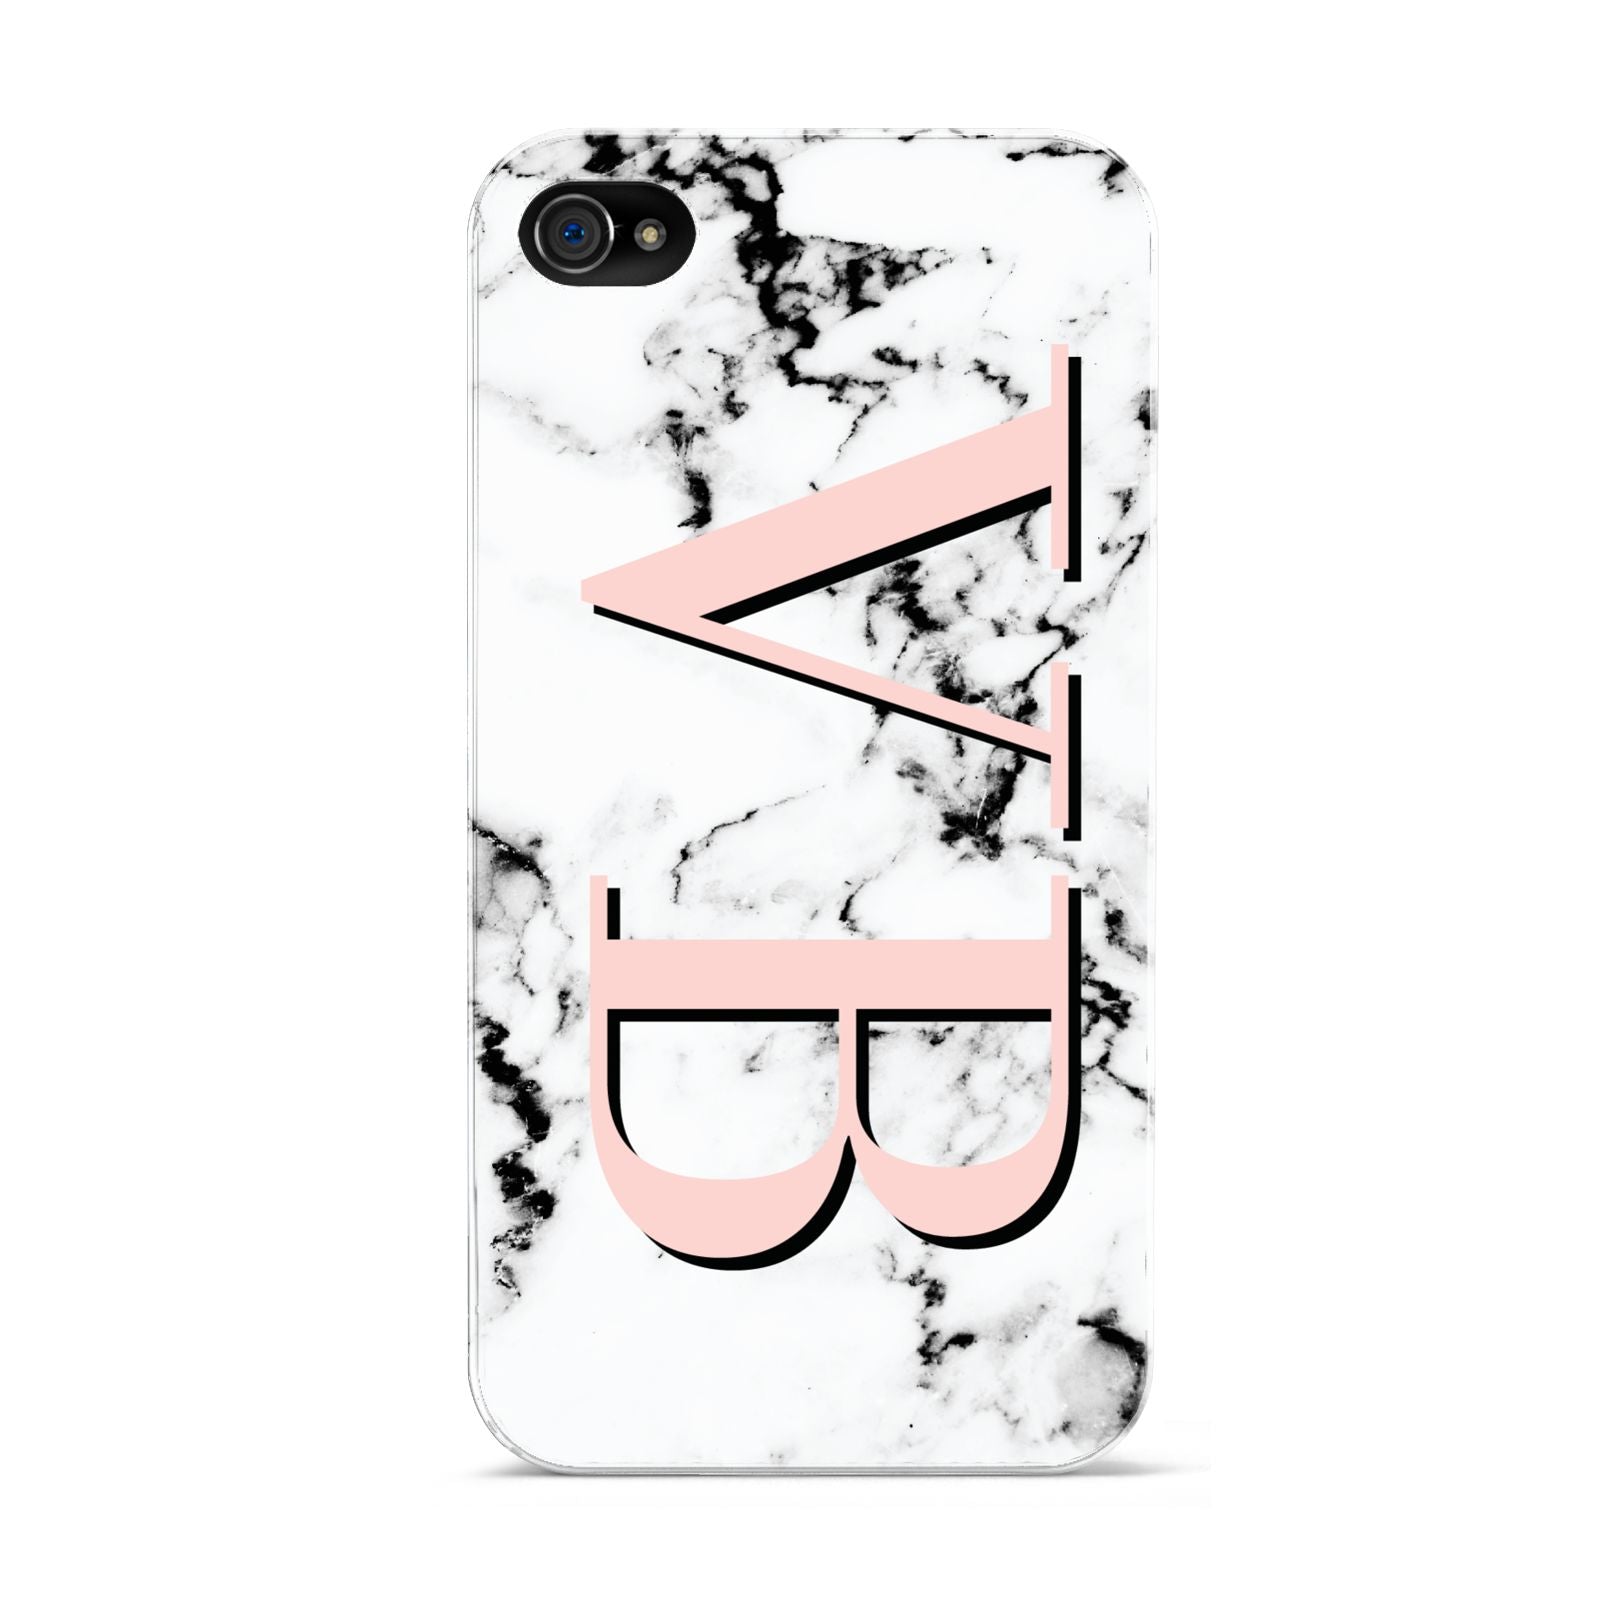 Personalised Coral Malble Initials Apple iPhone 4s Case